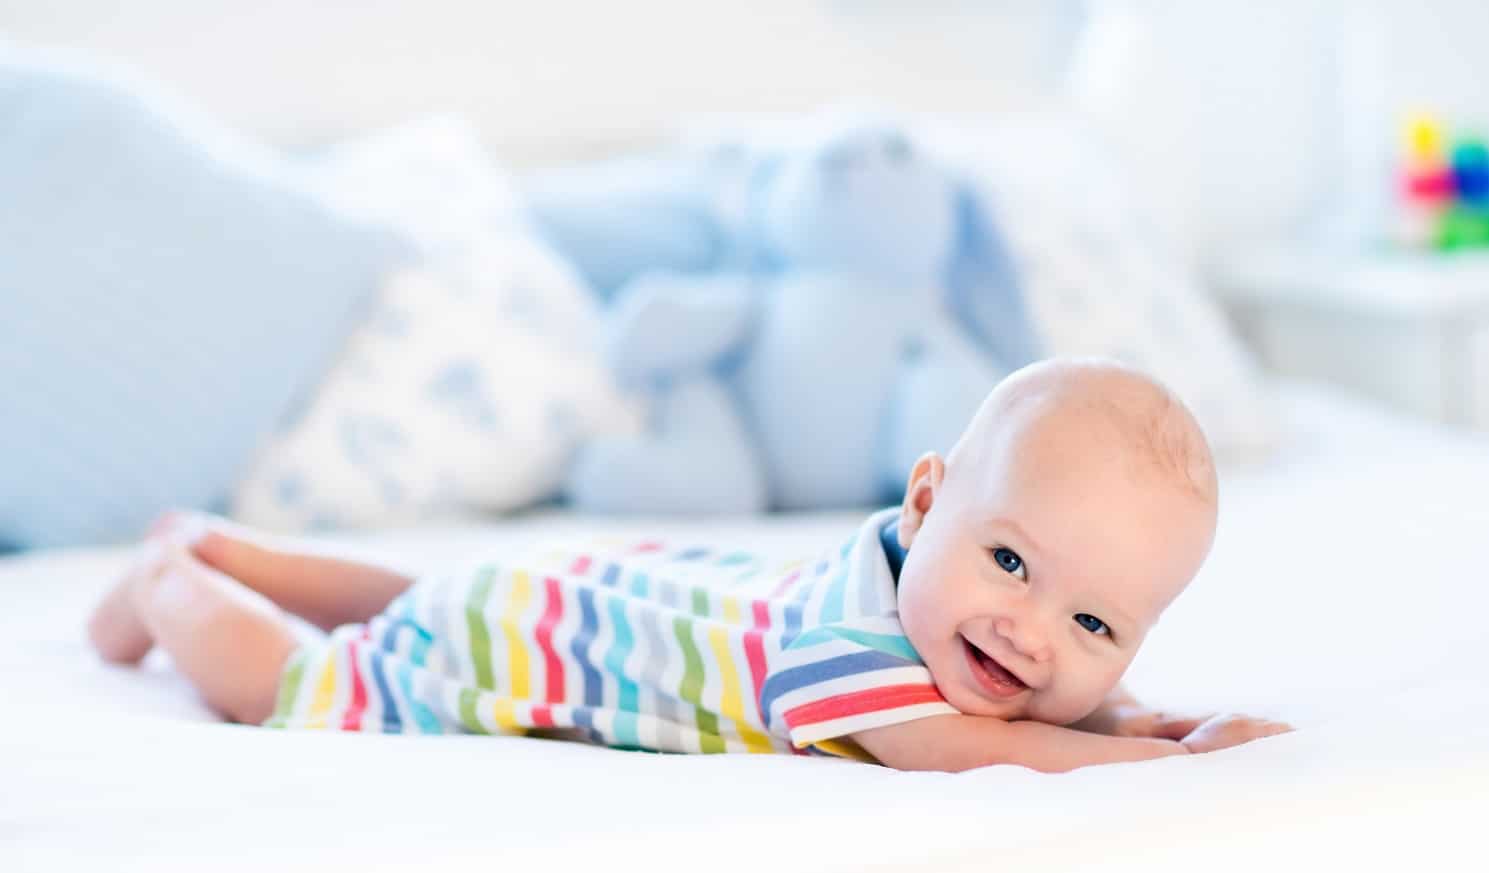 know the interesting reasons of babies smile during sleep - Why Do Babies Laugh in Their Sleep?